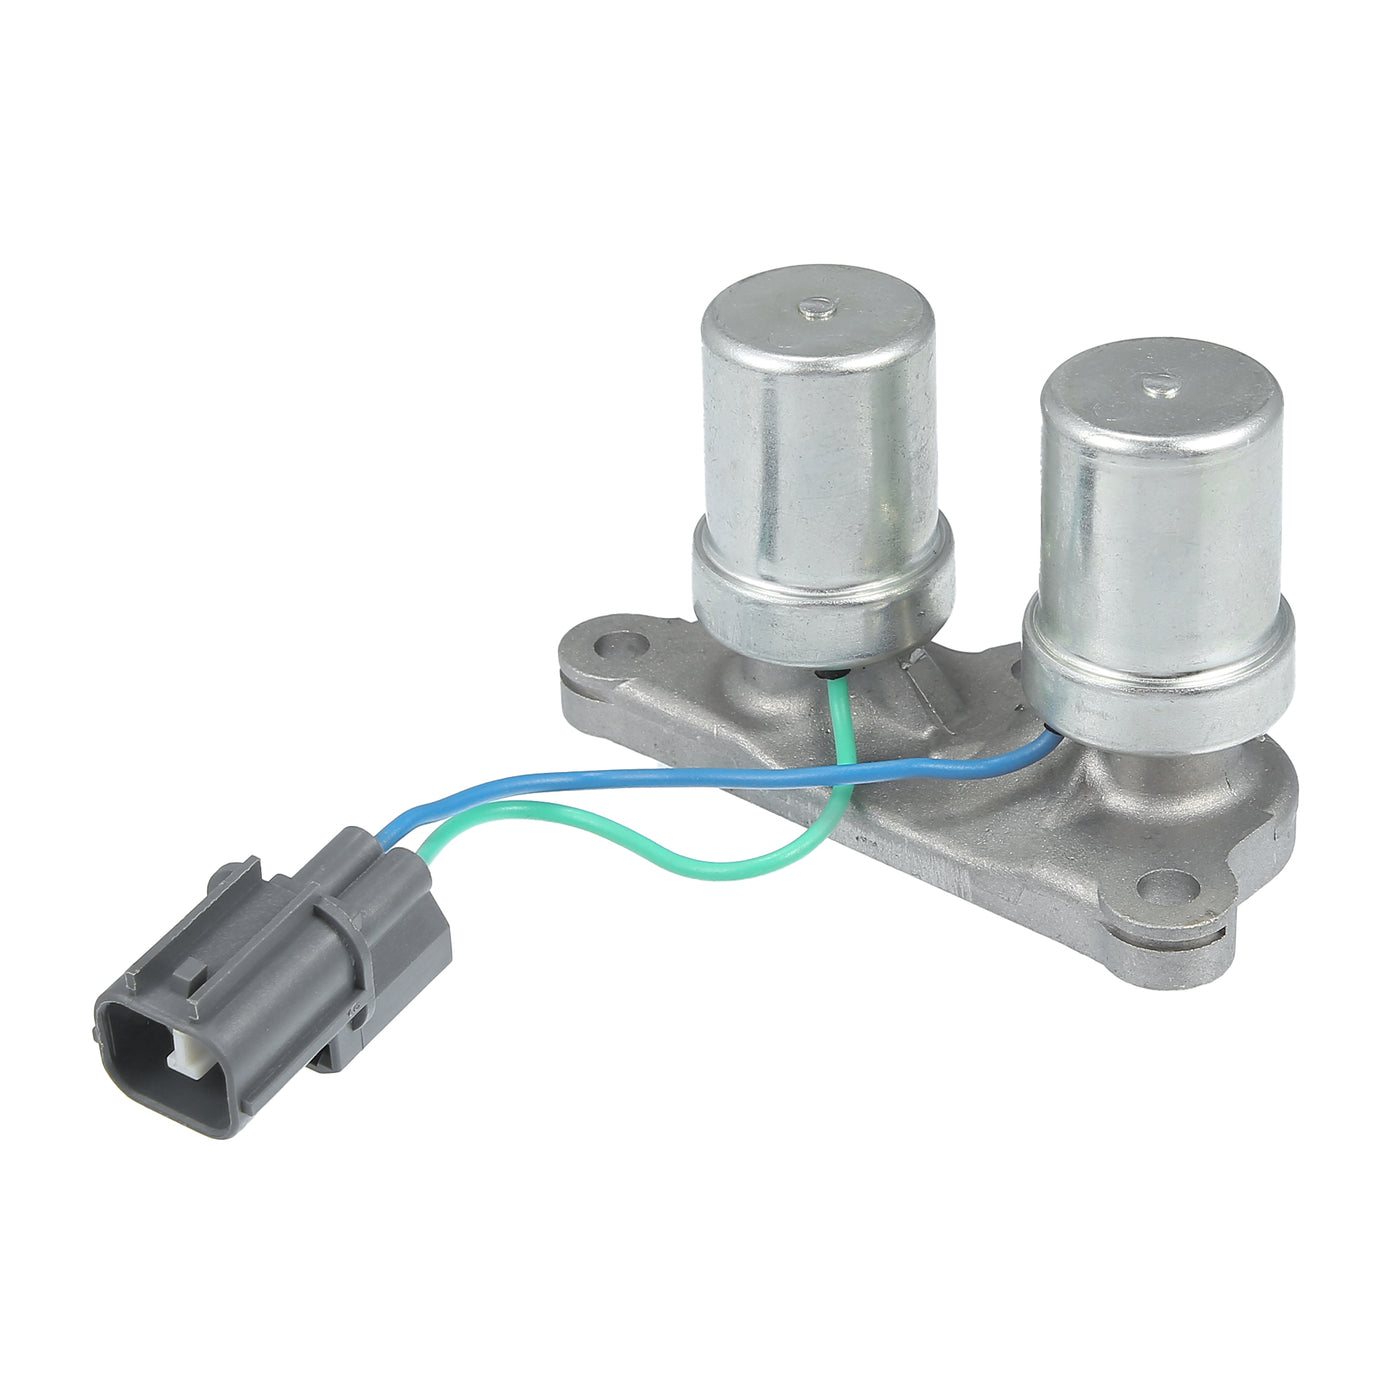 ACROPIX Transmission Shift Solenoid Replacement Fit for Honda CR-V - Pack of 1 Silver Tone Gray